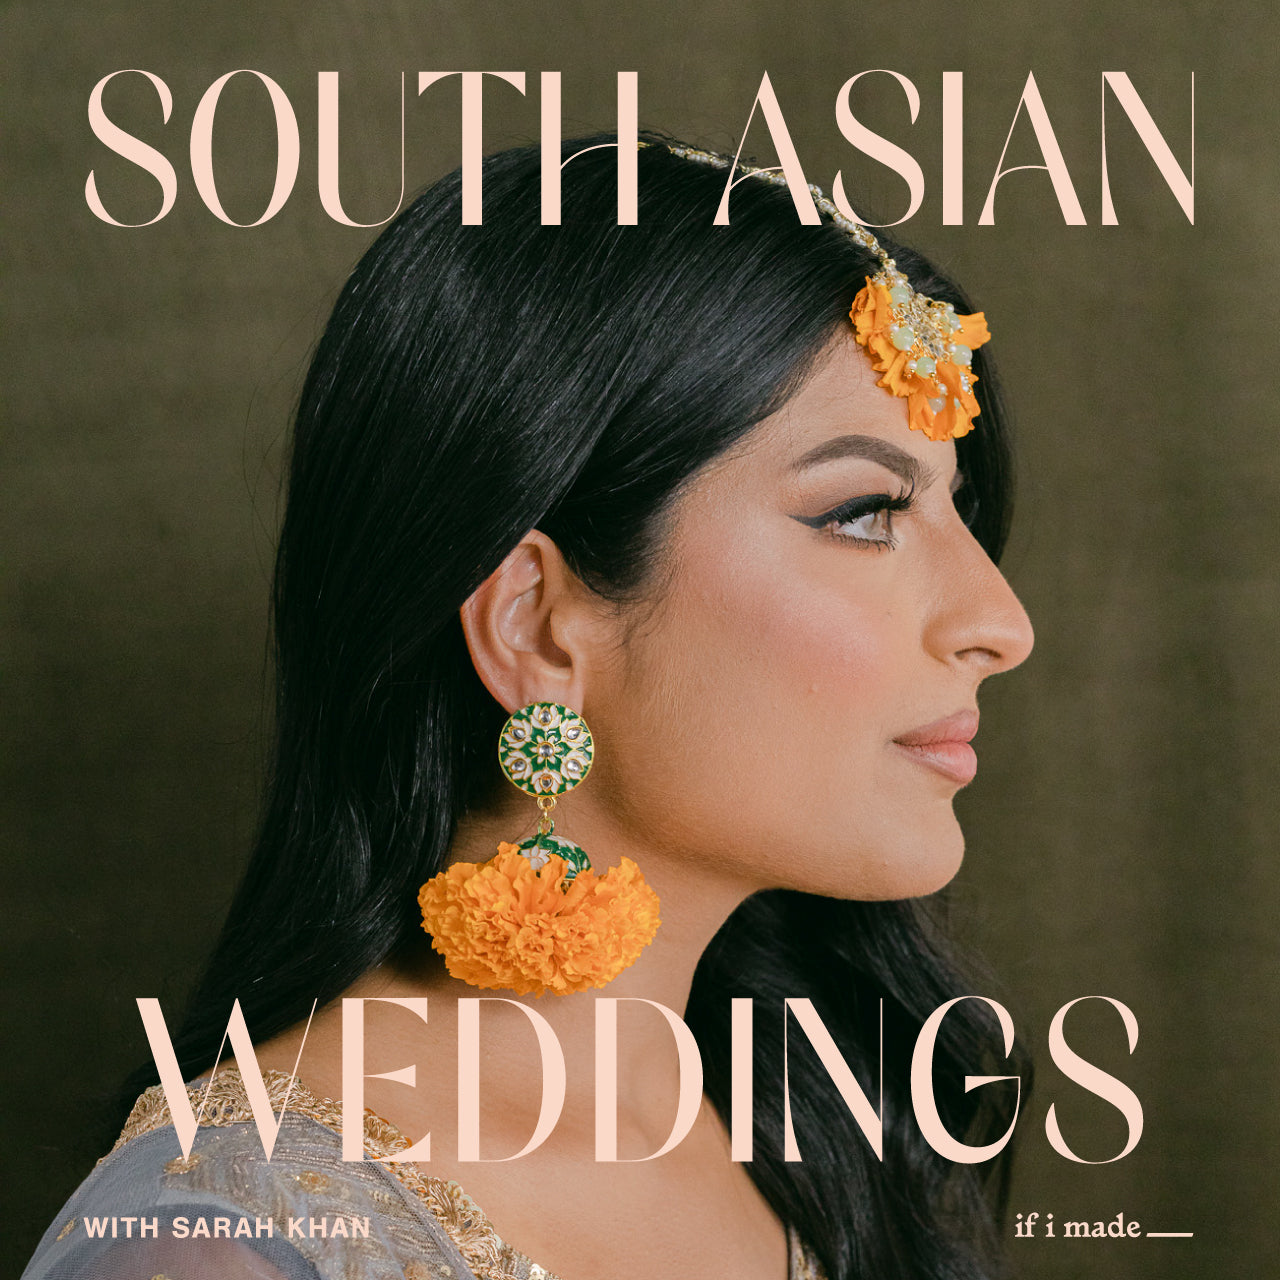 South Asian Weddings with Sarah Khan (SPP0522) -  16 payments of $99